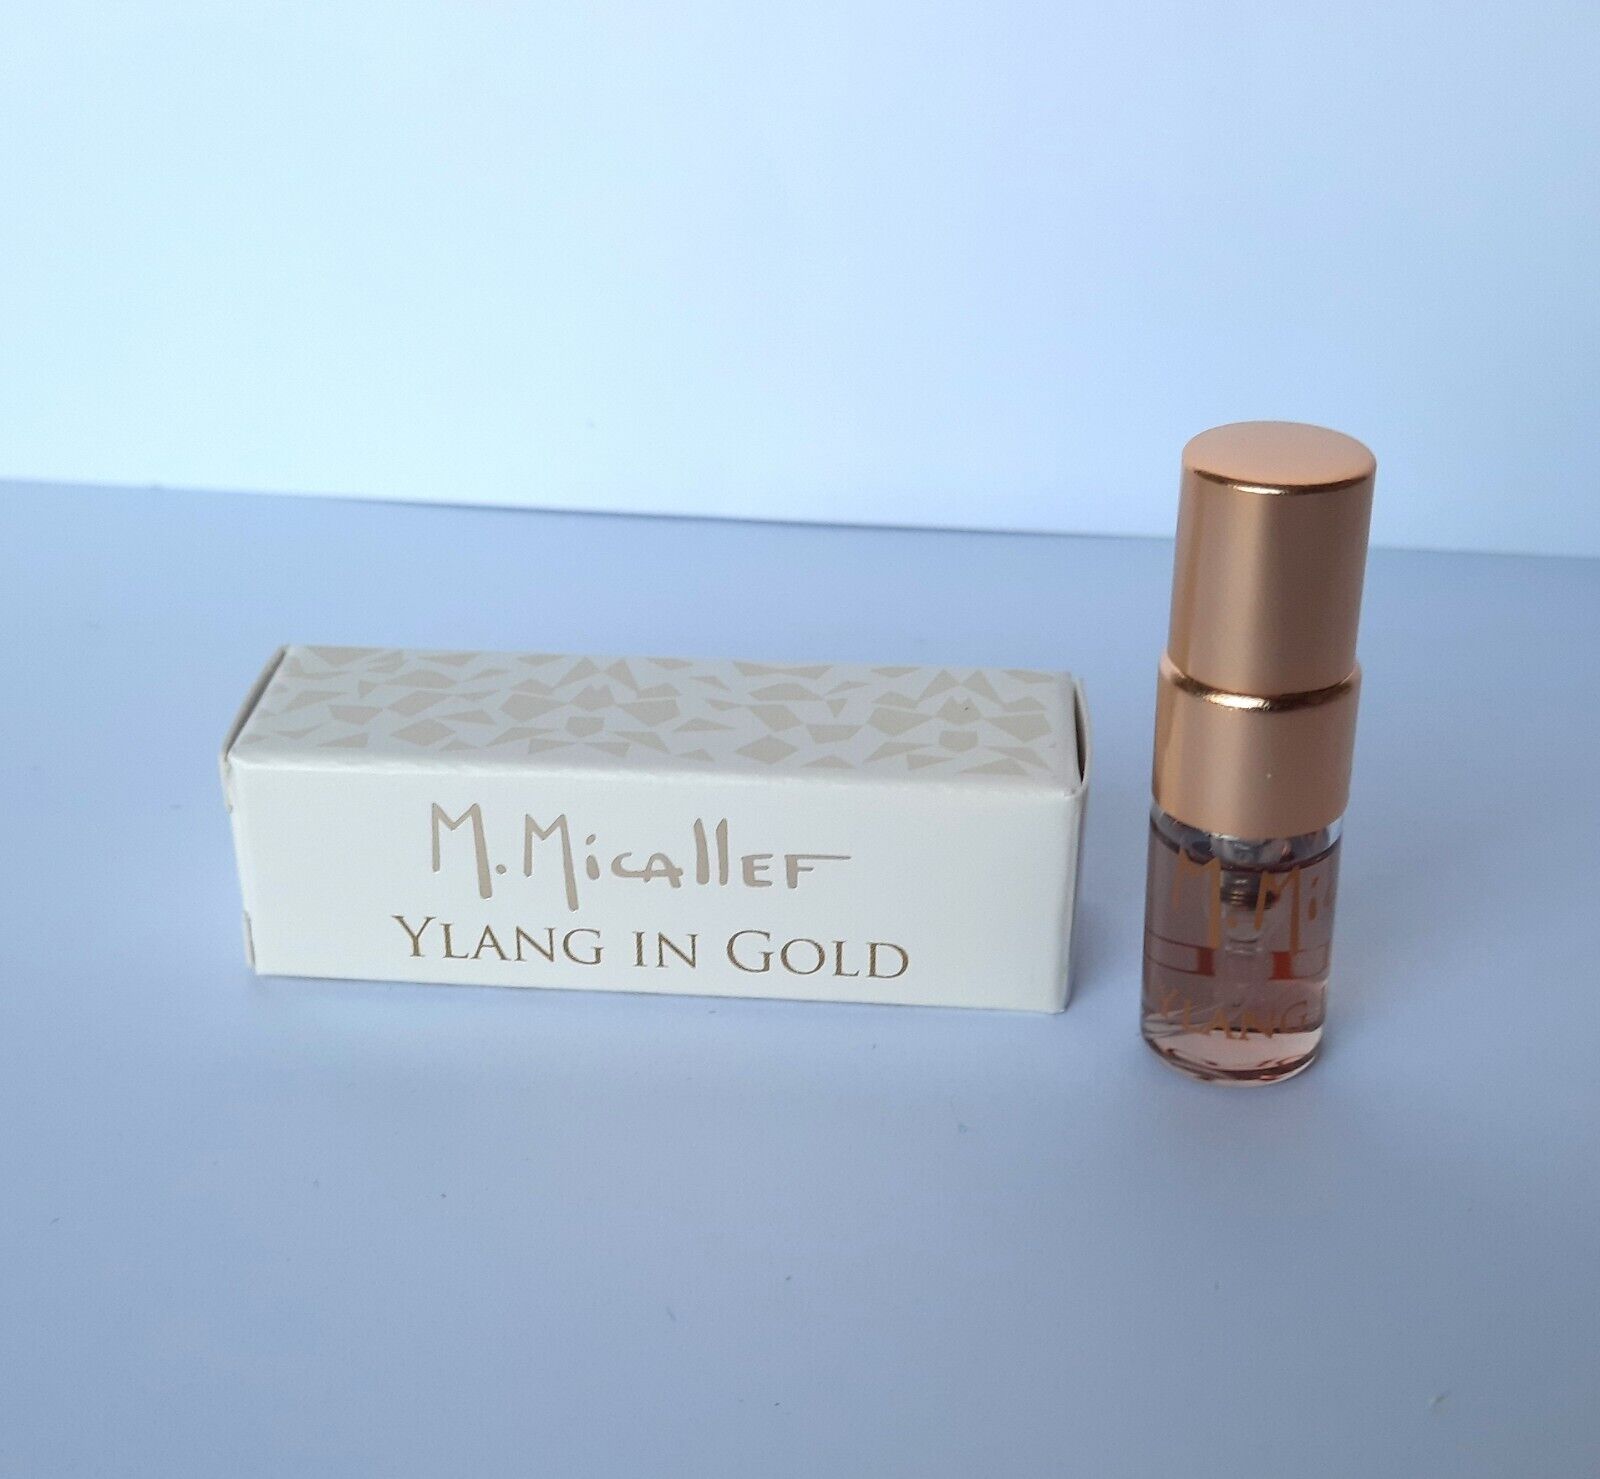 M. Micallef Ylang in Gold 2ml 0.06 Fl. Oz. official perfume sample